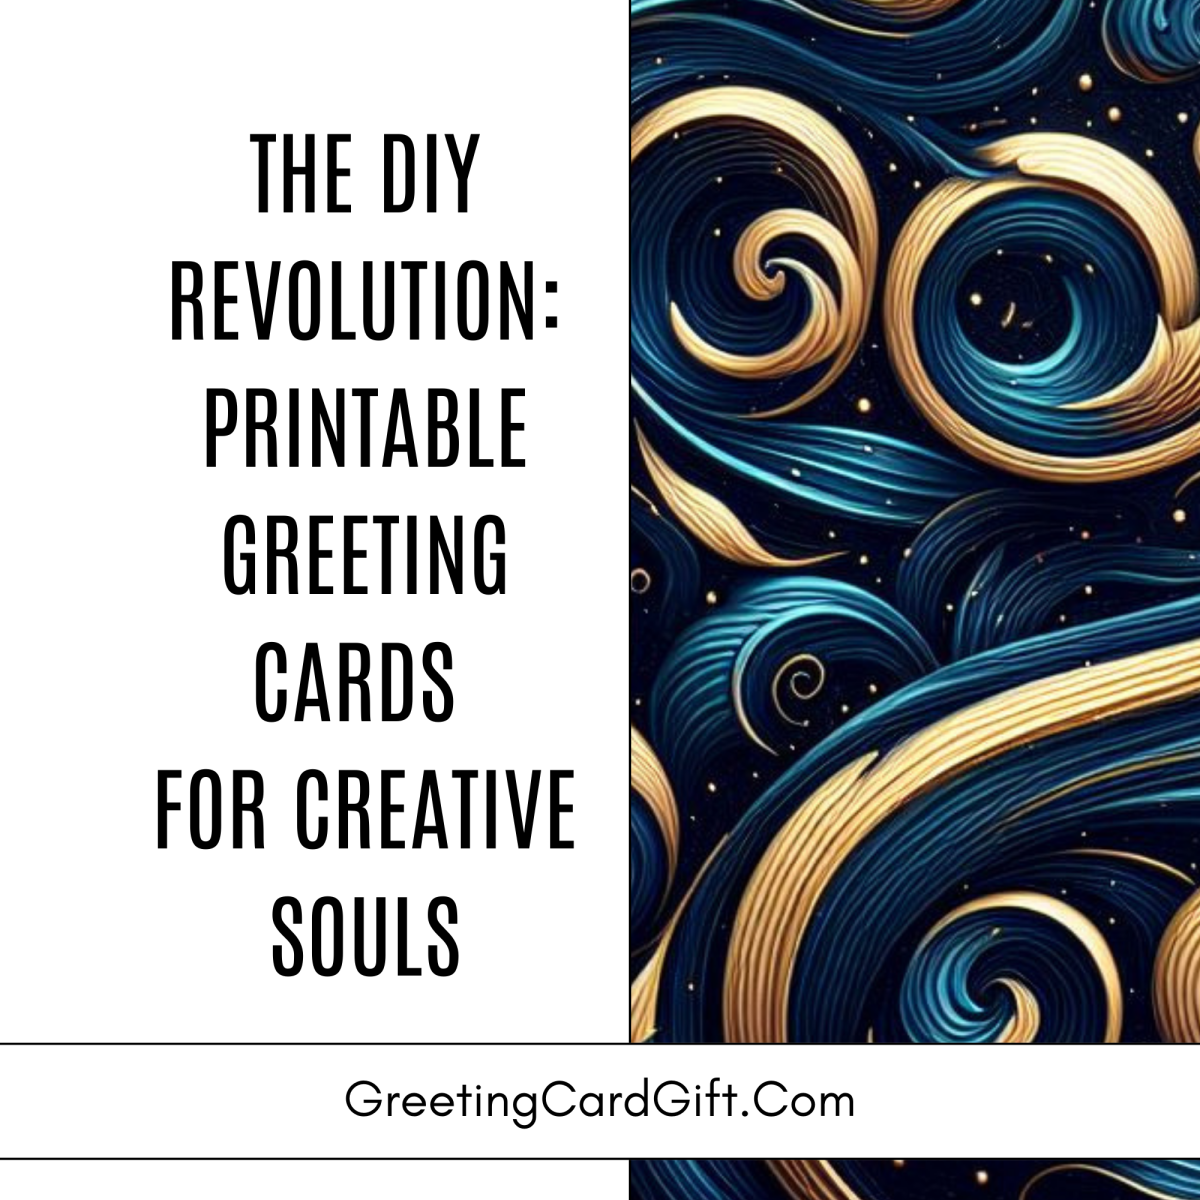 The DIY Revolution: Printable Greeting Cards For Creative Souls